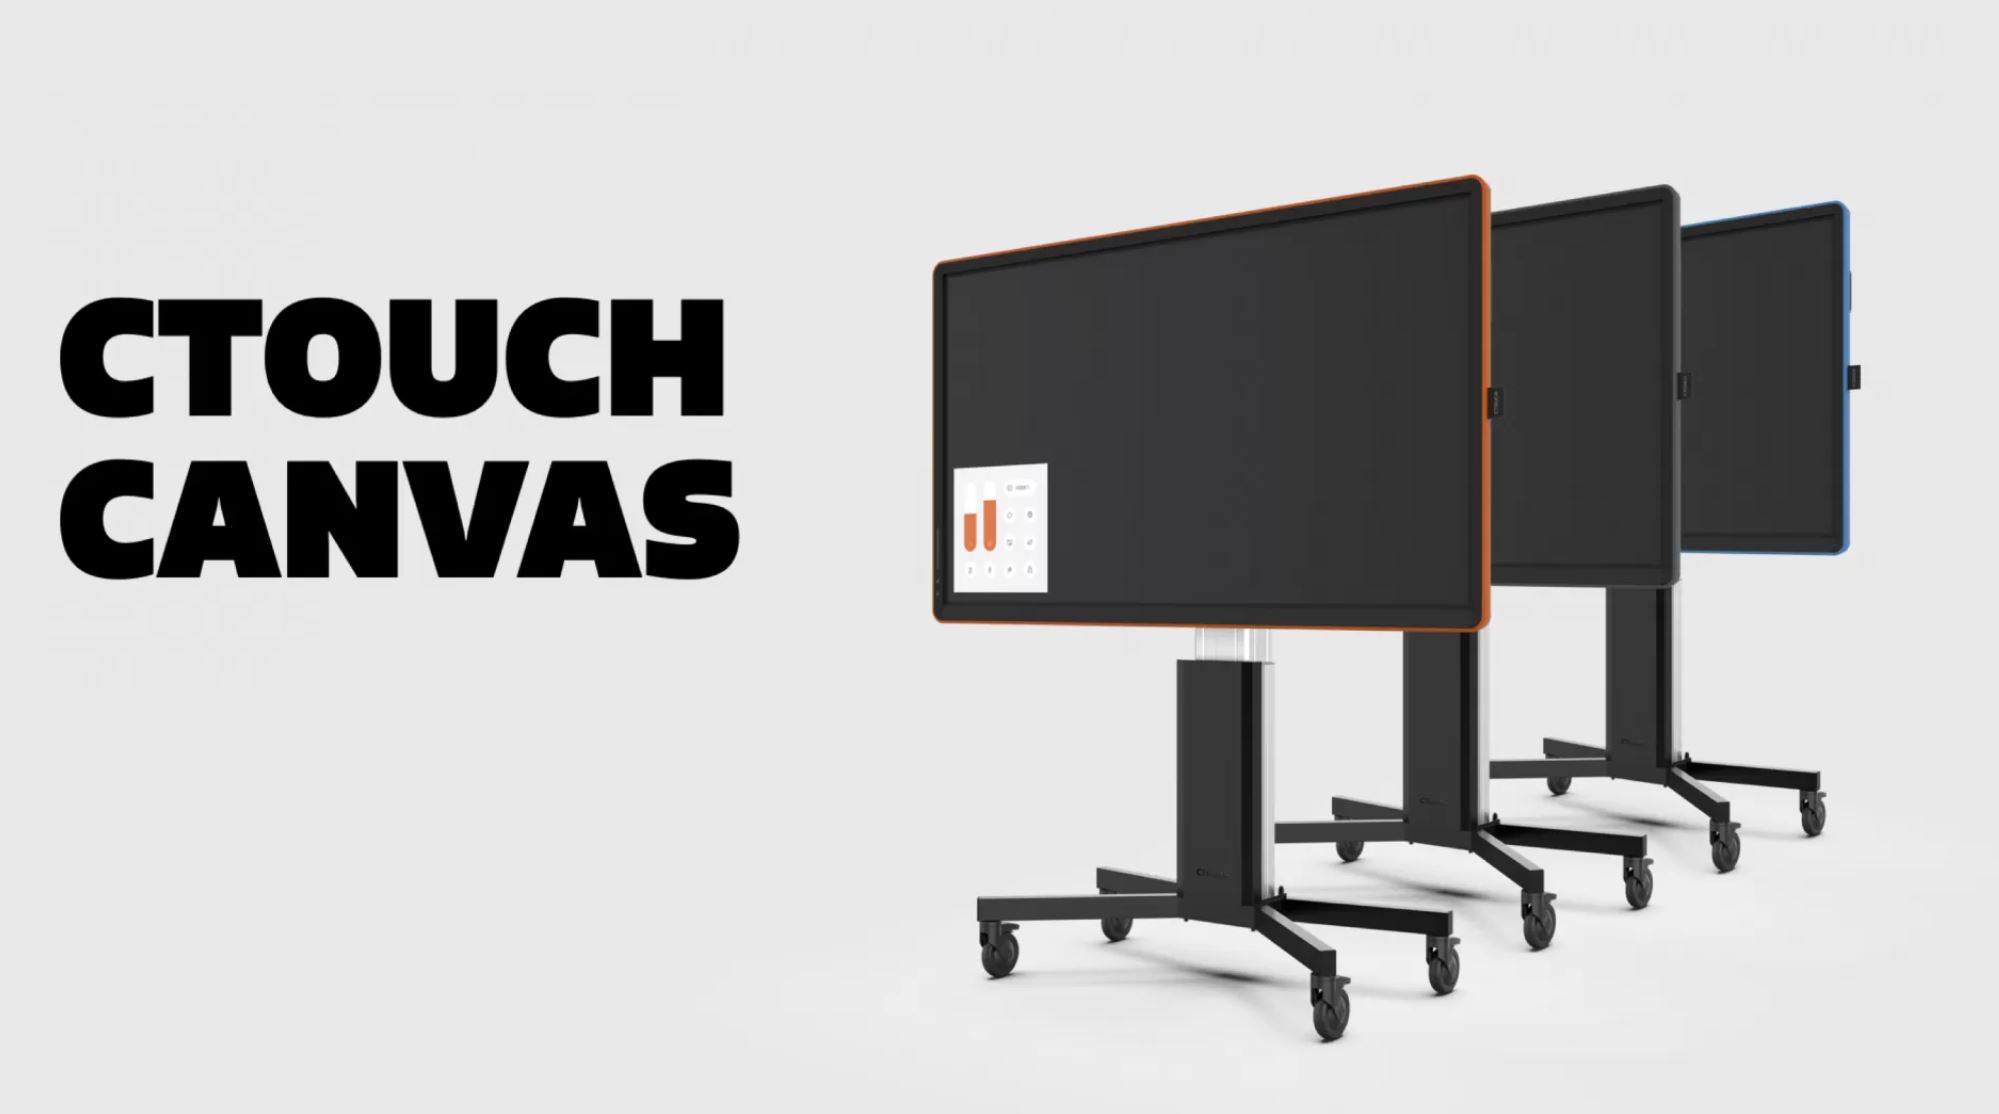 CTOUCH Canvas 65 - Midnight Grey - 65 inch - 350 cd/m² - Ultra-HD - 4K - 3840x2160 - NO-OS operating system - 20 point - Touch Display